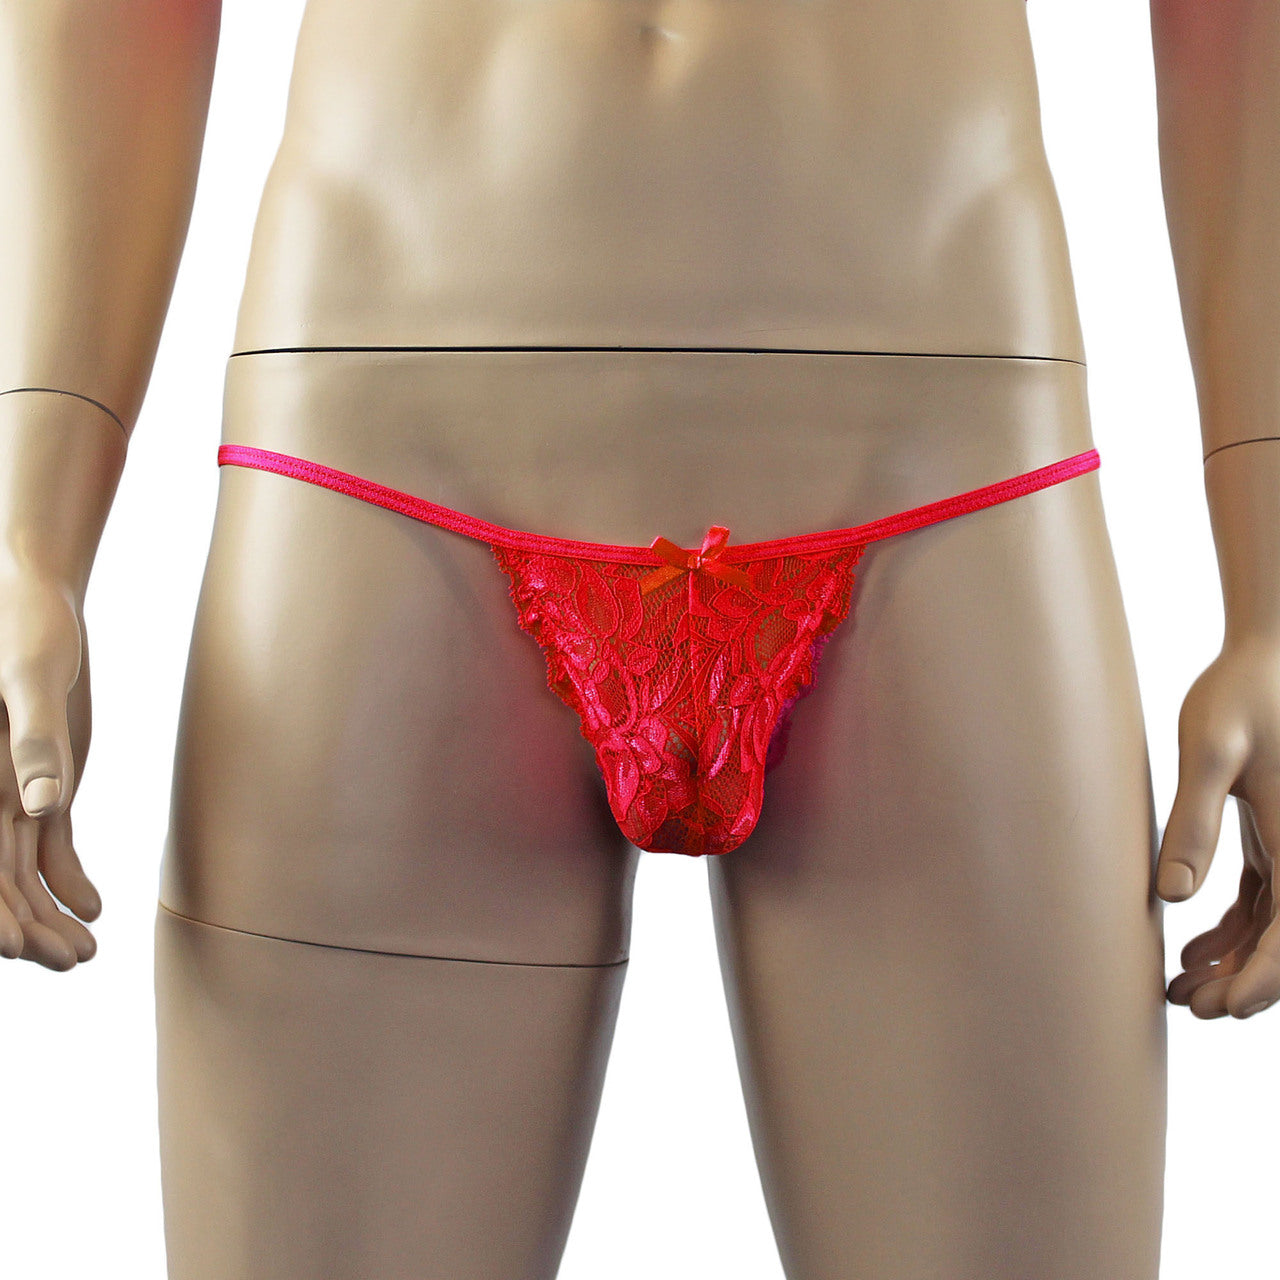 Mens Kristy Sexy Lace Pouch G string Panty Male Lingerie Red